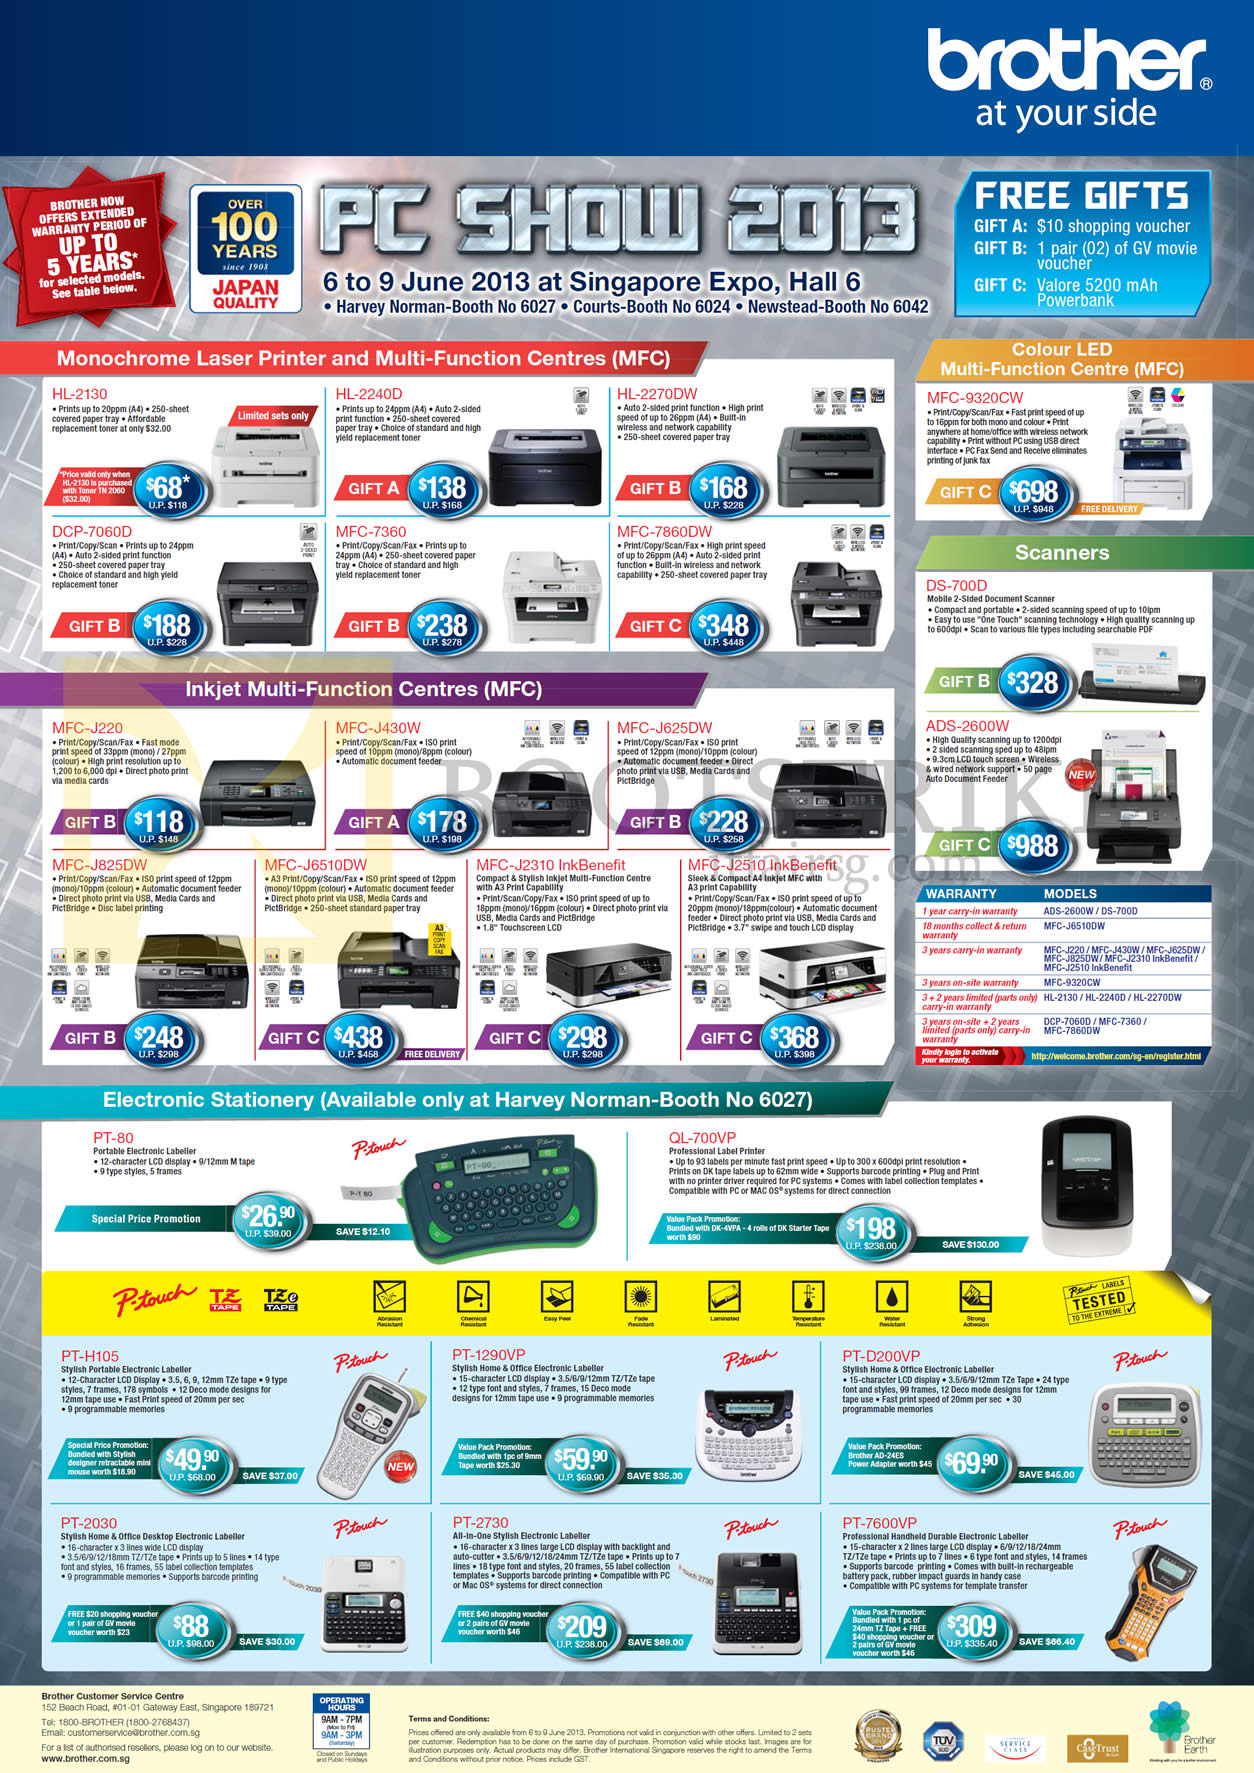 PC SHOW 2013 price list image brochure of Brother Printers Laser HL-2130, 2240D, 2270Dw, DCP-7060D, MFC-7360, Inkjet J625DW, J825, 9320CW, Scanners DS-700D, ADS-2600W, Labellers P-Touch PT-H105, 2030